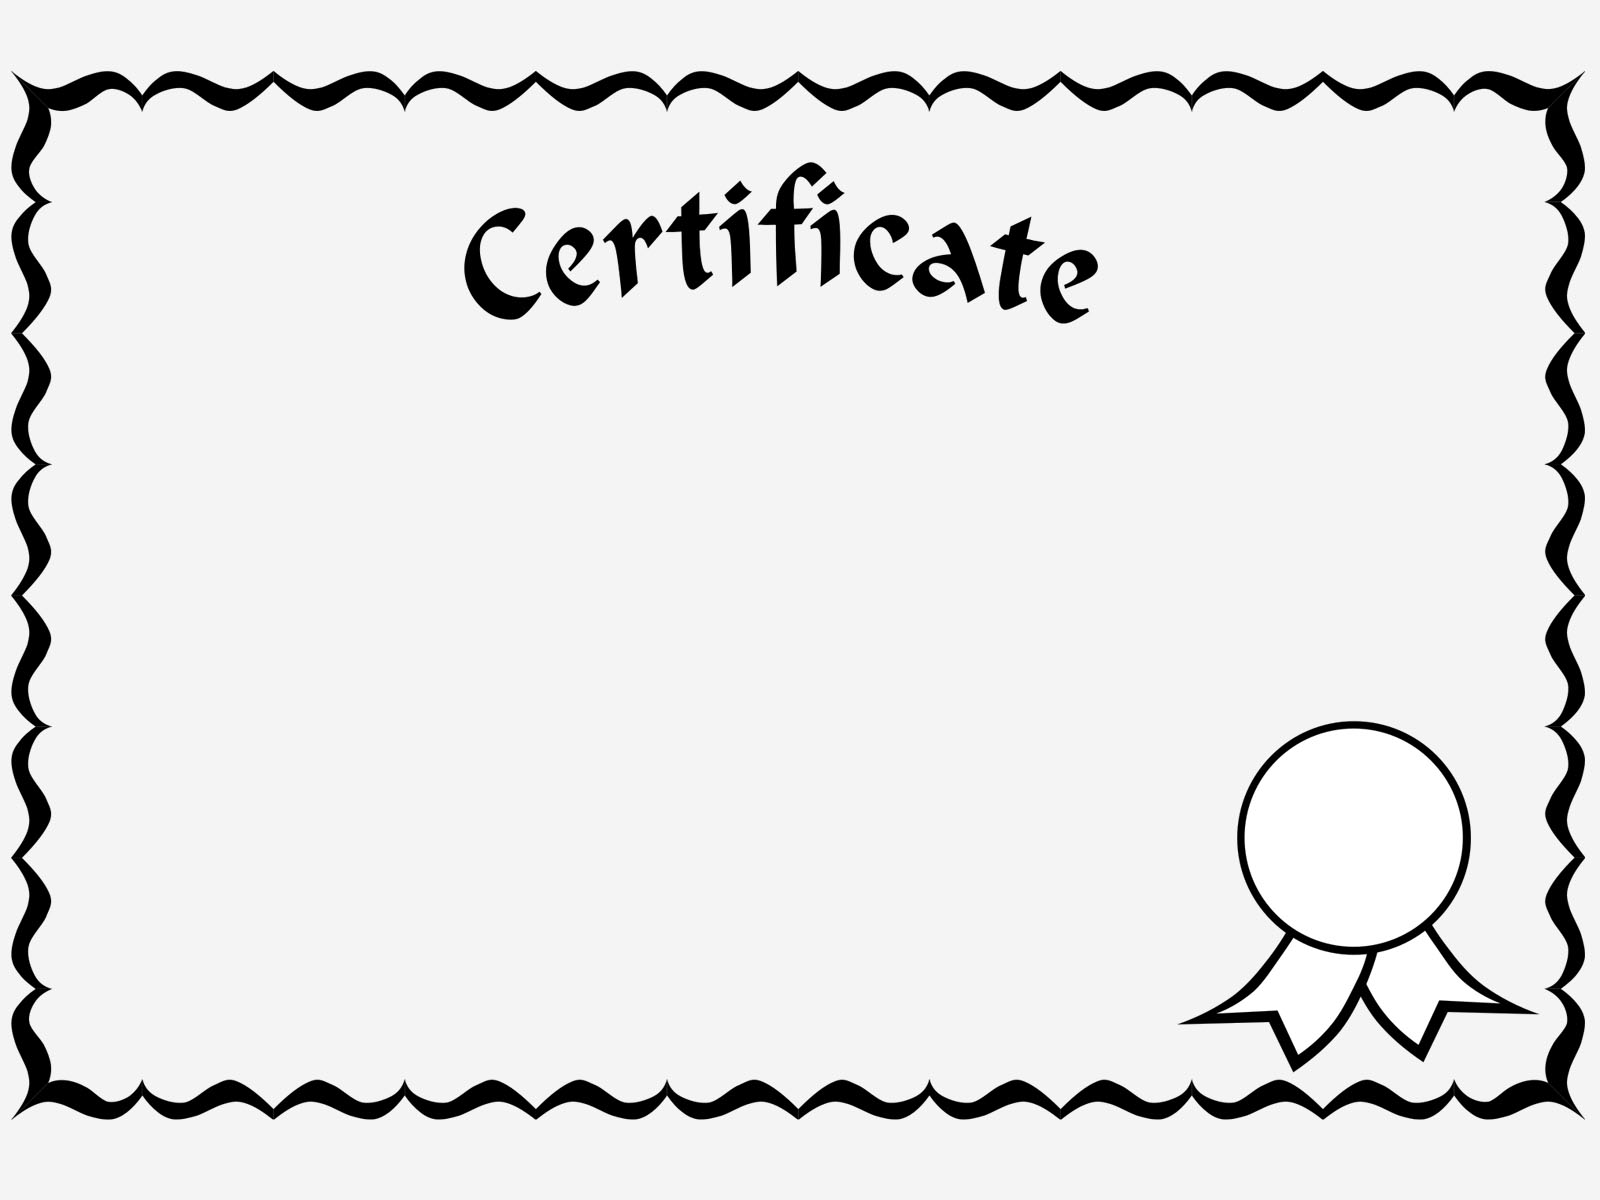 Certificate Background - ClipArt Best